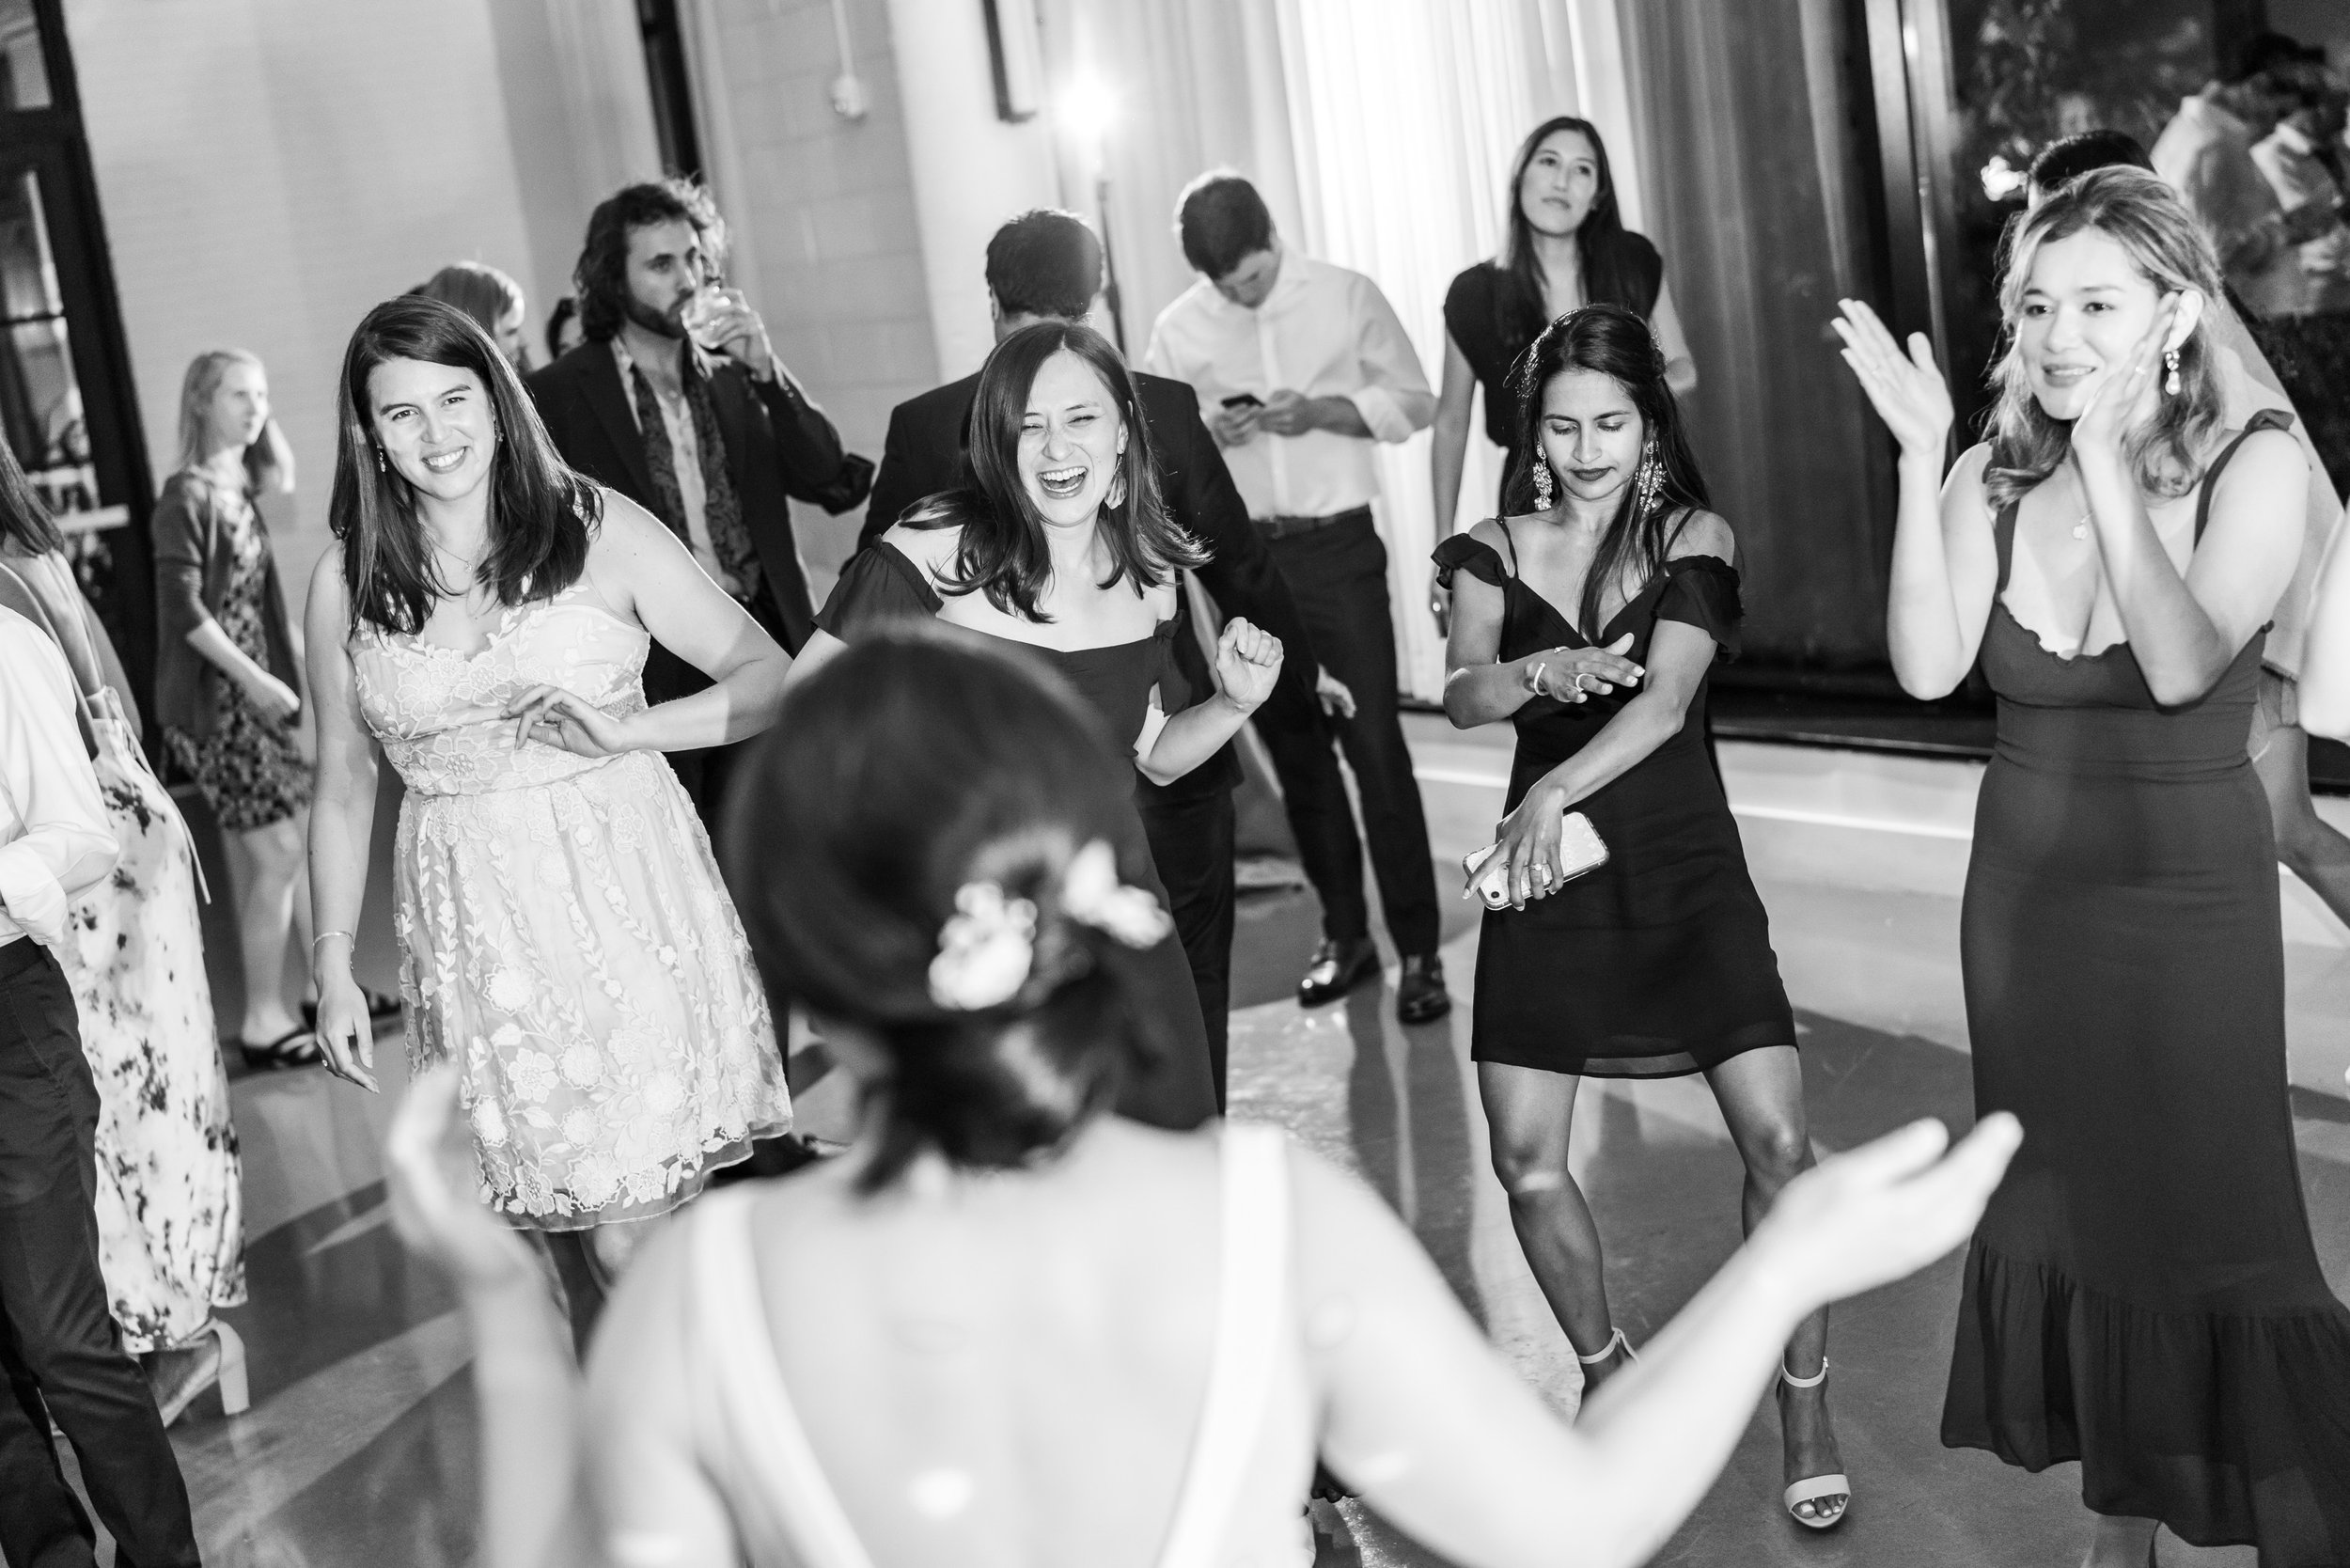 Bride dances the last song with her fun wedding guests at the Eaton hotel